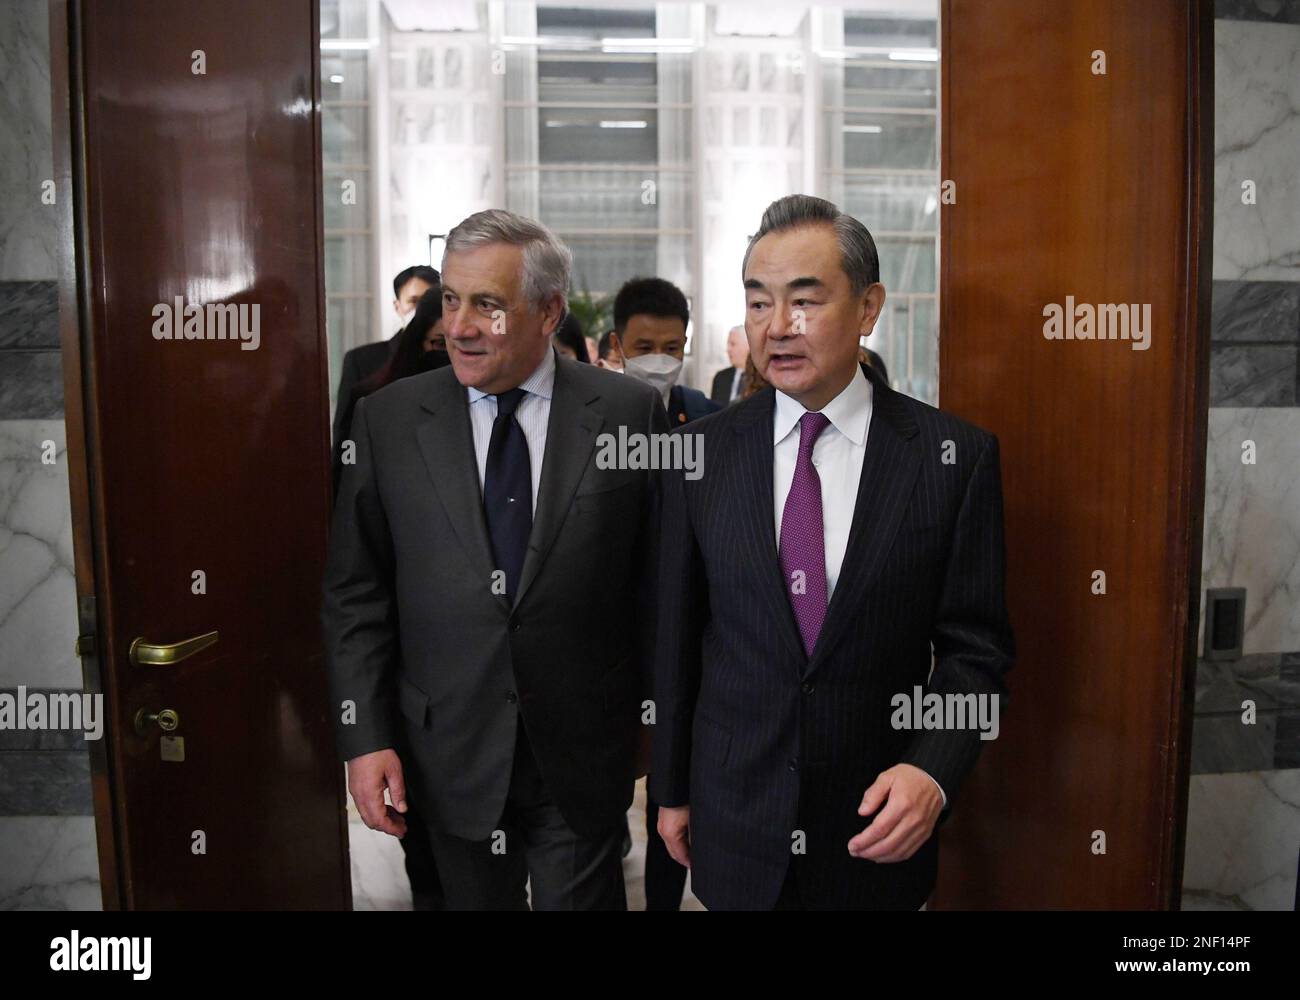 Rome, Italy. 16th Feb, 2023. Wang Yi (R), a member of the Political Bureau of the Communist Party of China (CPC) Central Committee and director of the Office of the Foreign Affairs Commission of the CPC Central Committee, meets with Italian Deputy Prime Minister and Minister of Foreign Affairs Antonio Tajani in Rome, Italy, on Feb. 16, 2023. Credit: Jin Mamengni/Xinhua/Alamy Live News Stock Photo